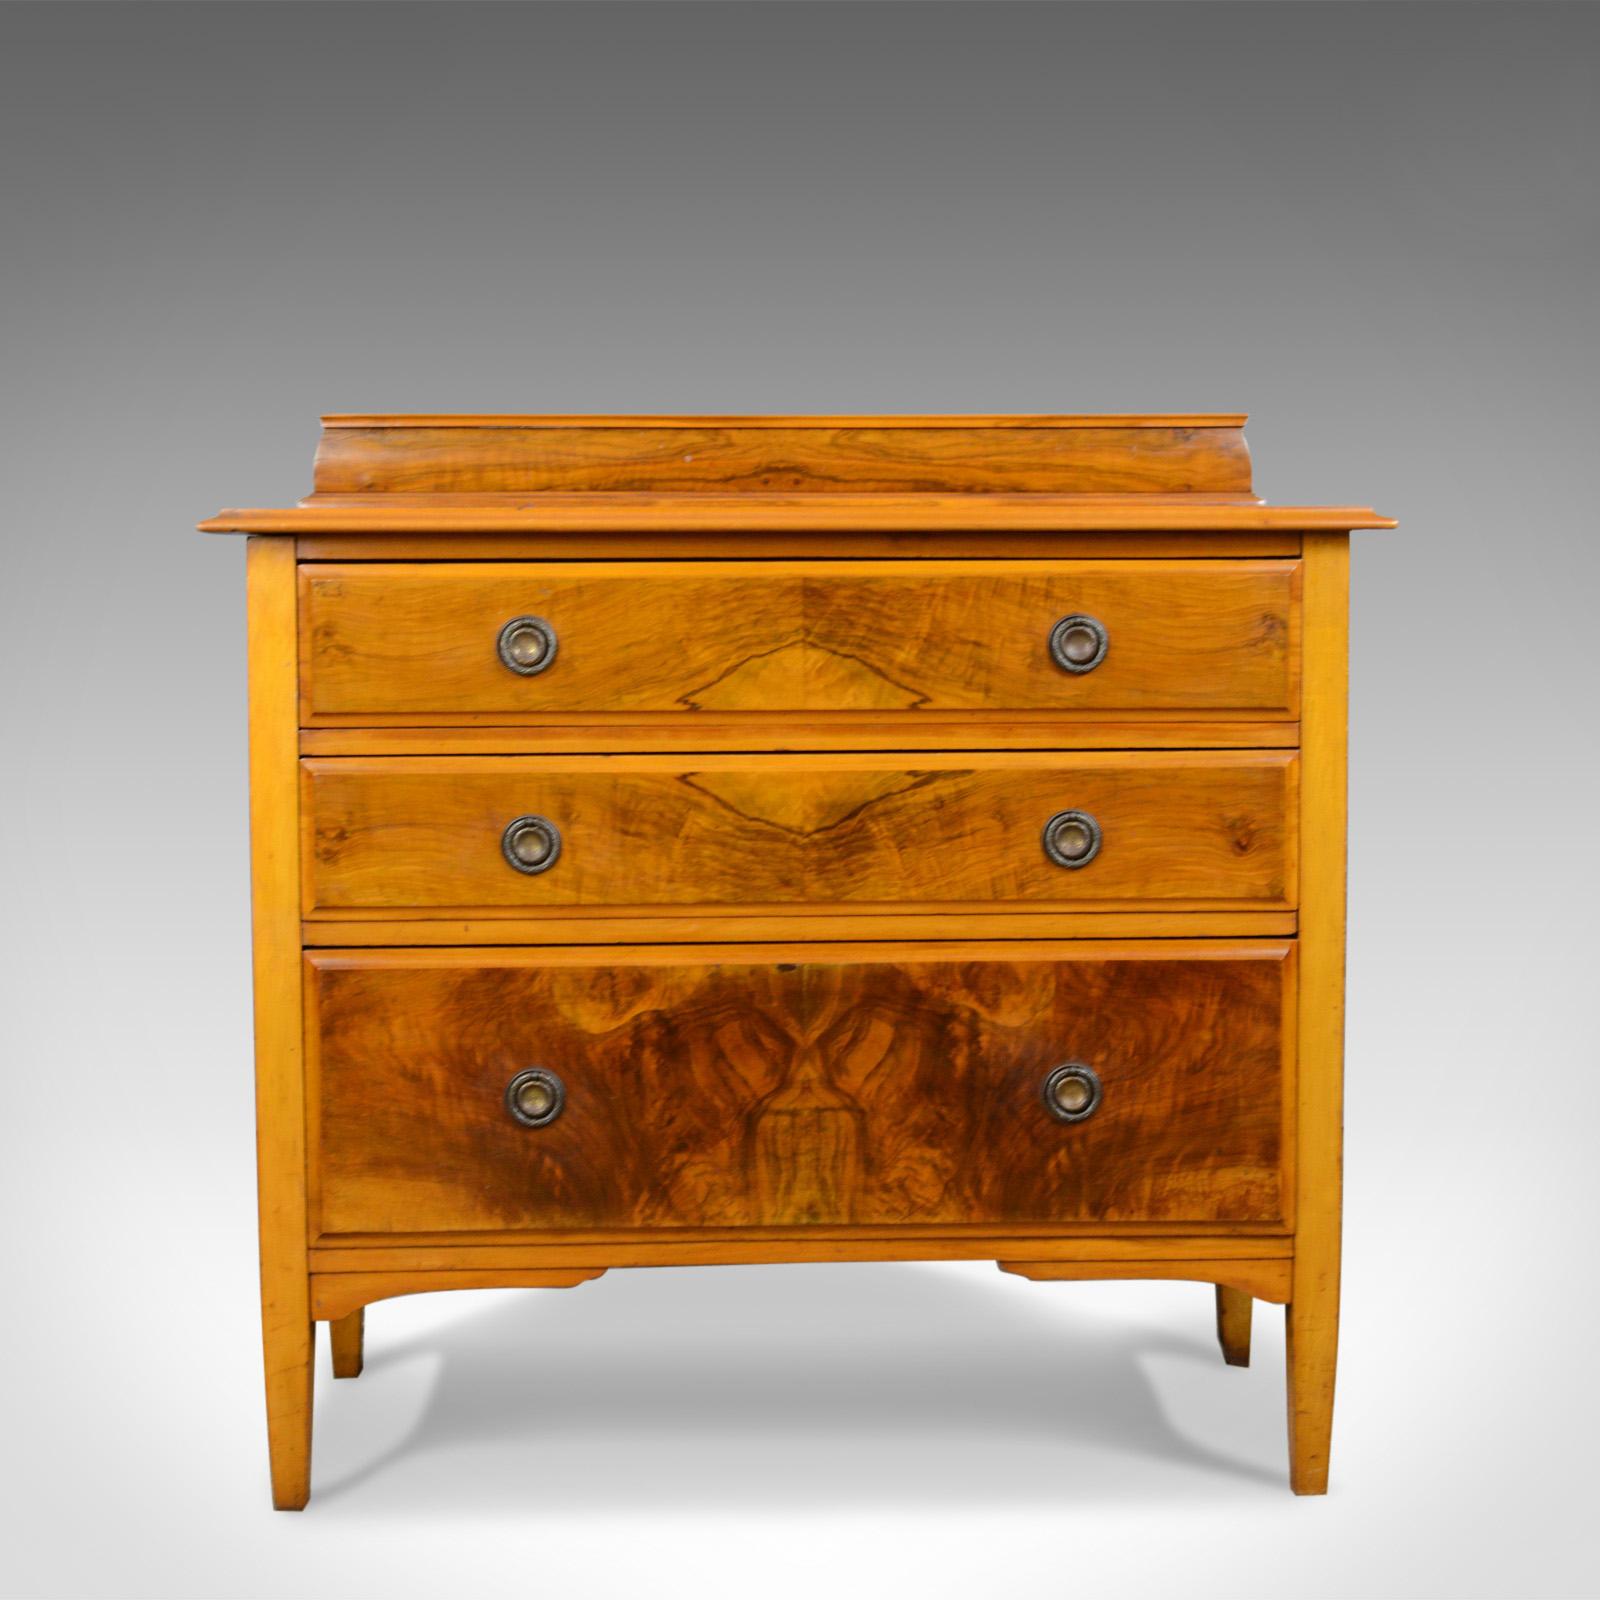 This is an antique chest of drawers in satin figured walnut. An English, Victorian piece dating to circa 1900.

Attractive shimmer to the well figured satin walnut
Good color throughout with a desirable aged patina
Configured as three straight